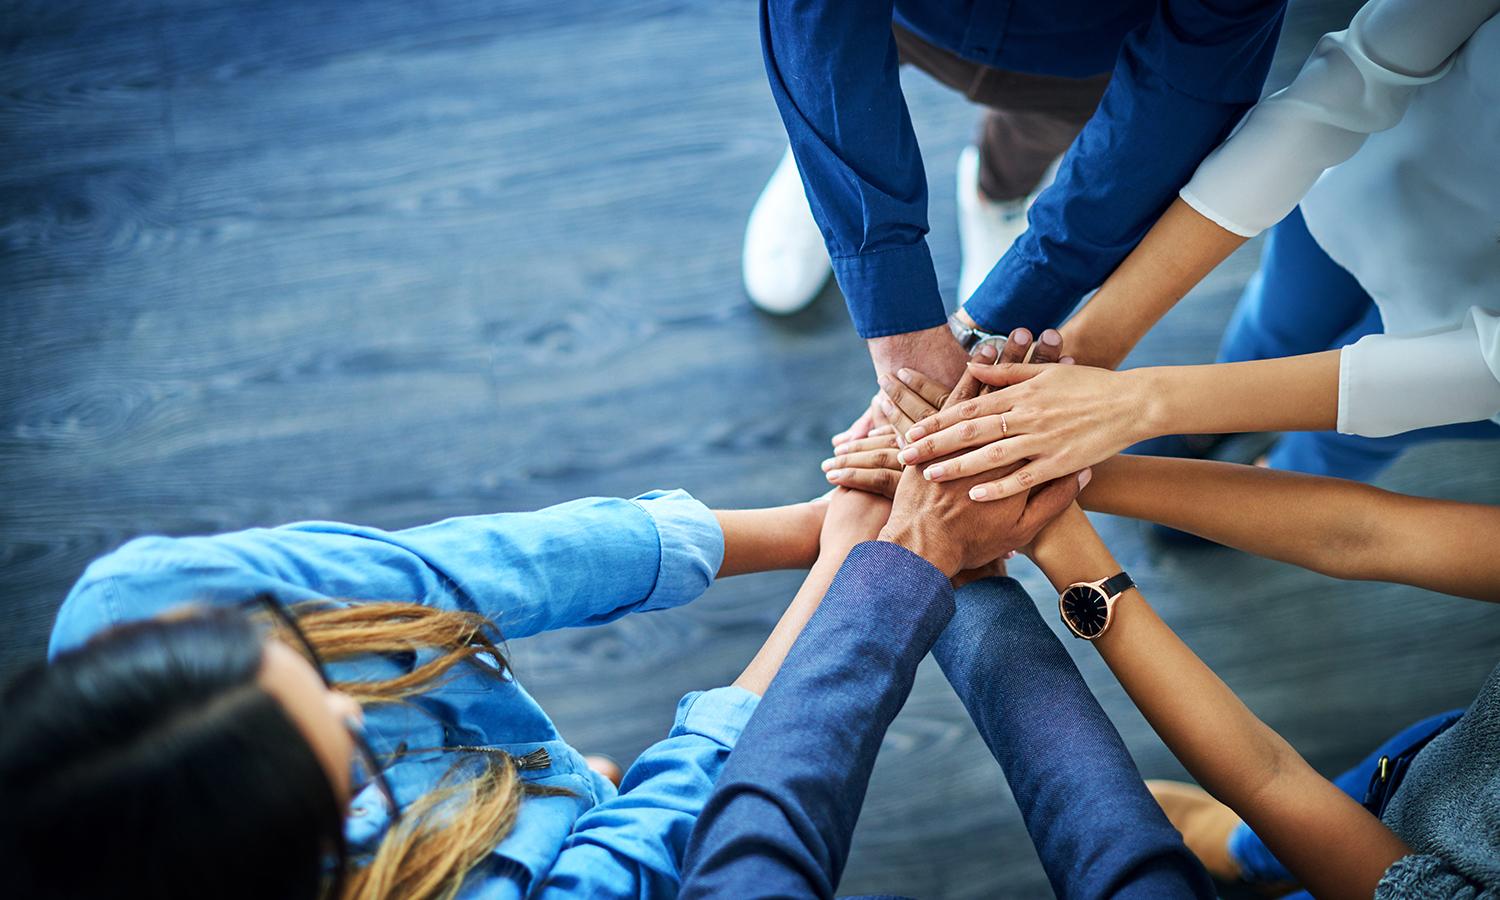 Defining and refining changes the purpose of how teams work together, says leadership columnist Michael Santarcangelo. (iStock via Getty Images)